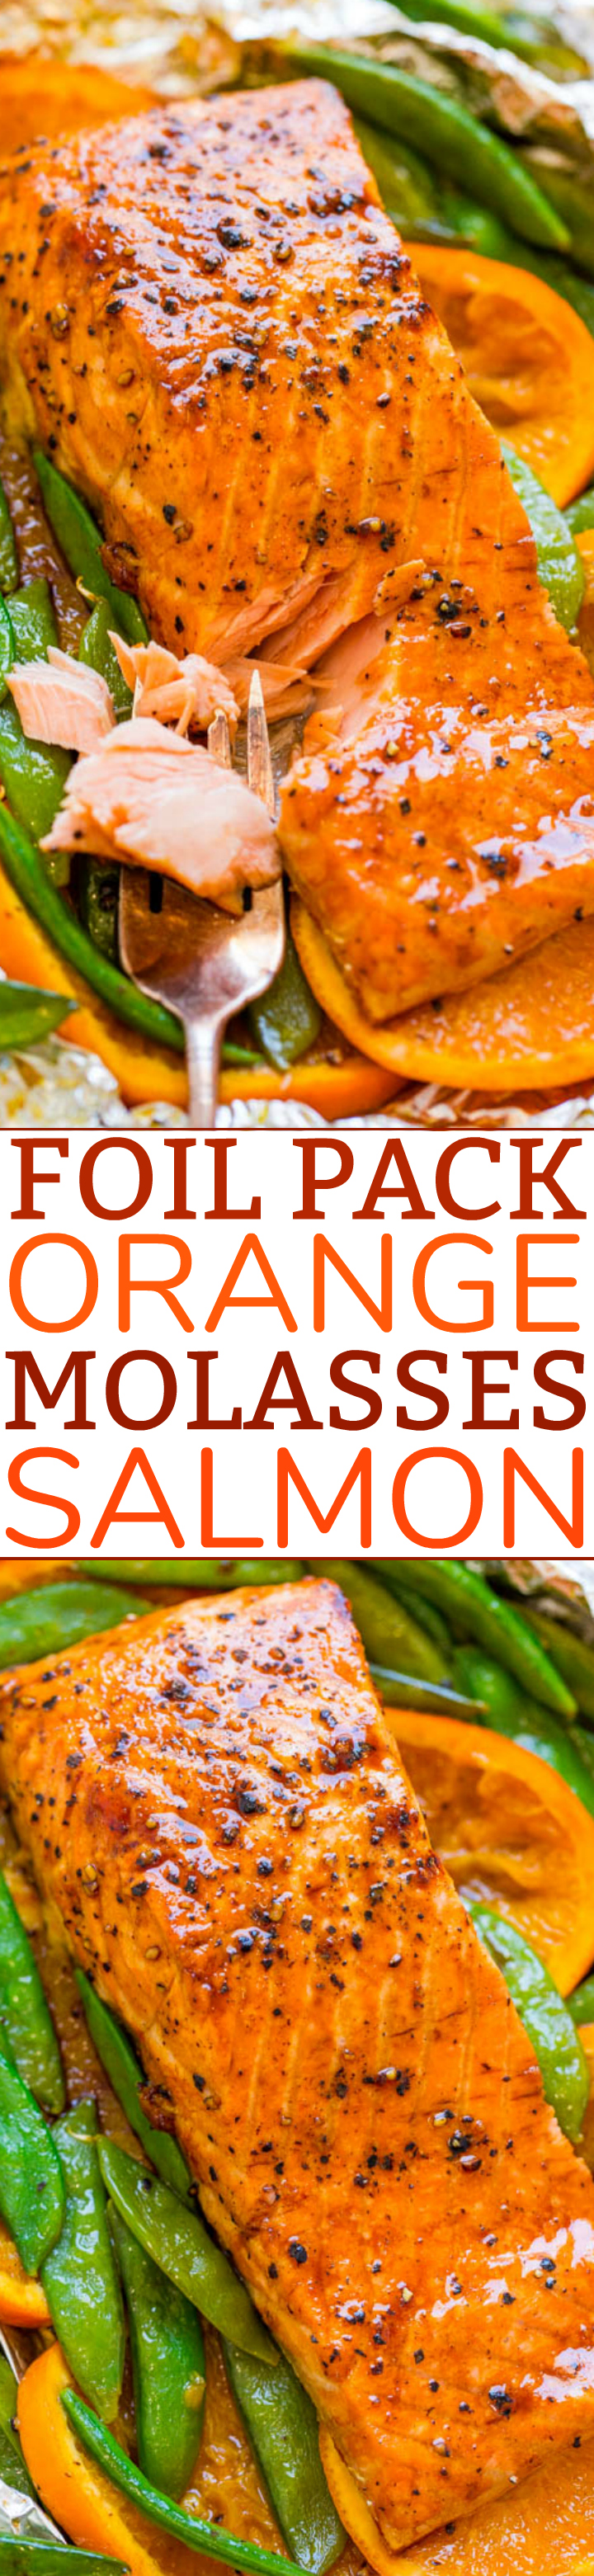 Foil Pack Orange Molasses Salmon - EASY, ready in 10 minutes, and a FOOLPROOF way to make grilled salmon!! Tender, juicy, and bursting with layers of FABULOUS flavors!!